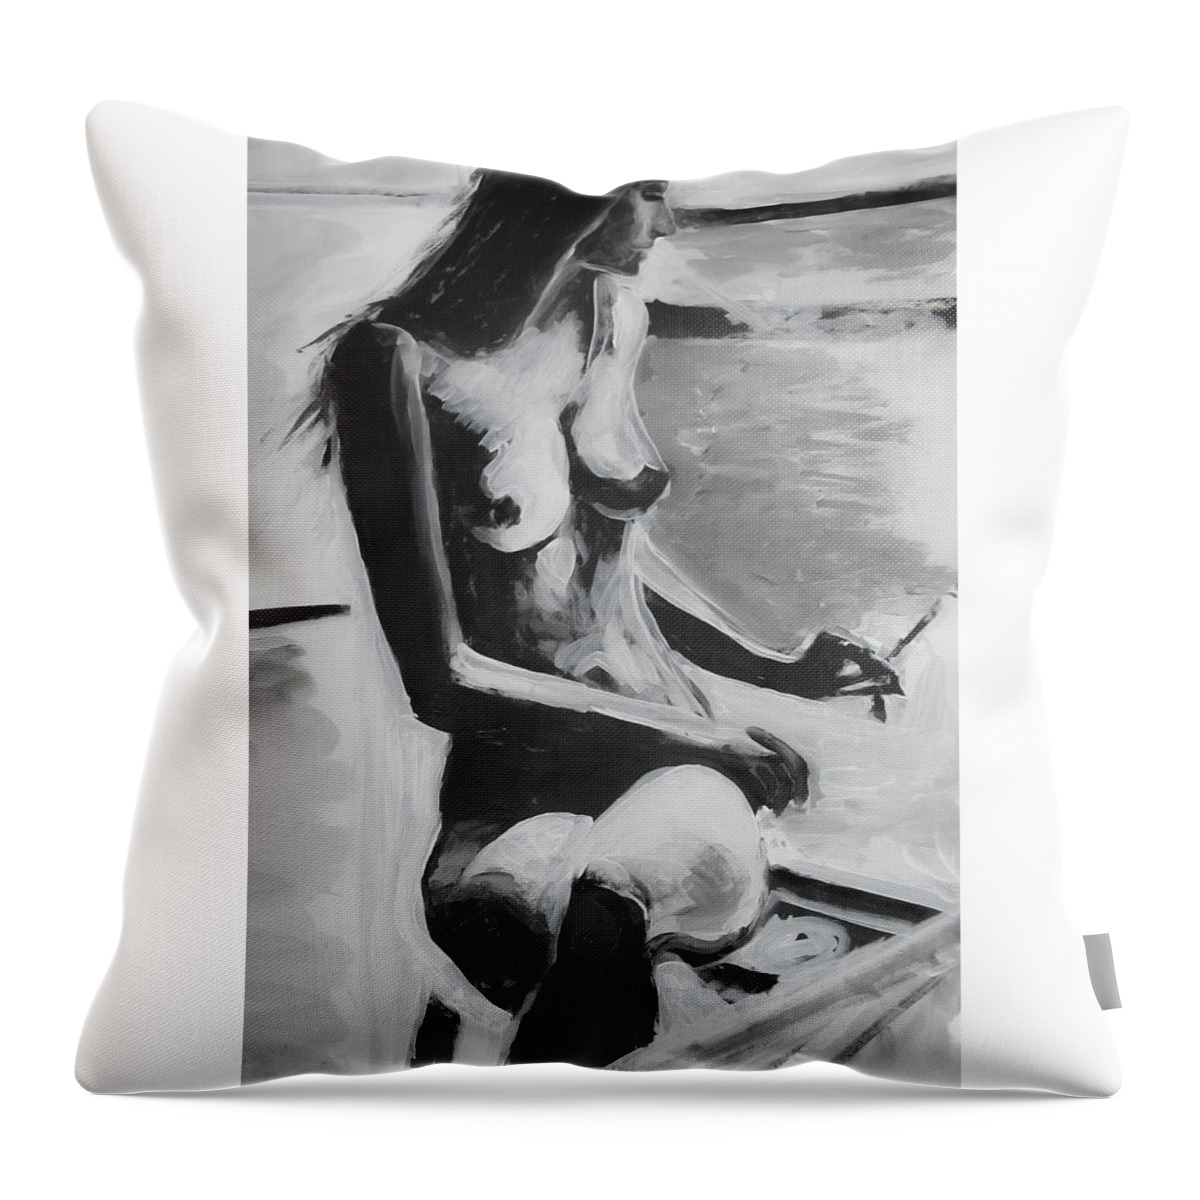 Beautiful Throw Pillow featuring the painting The French Balcony by Jarko Aka Lui Grande